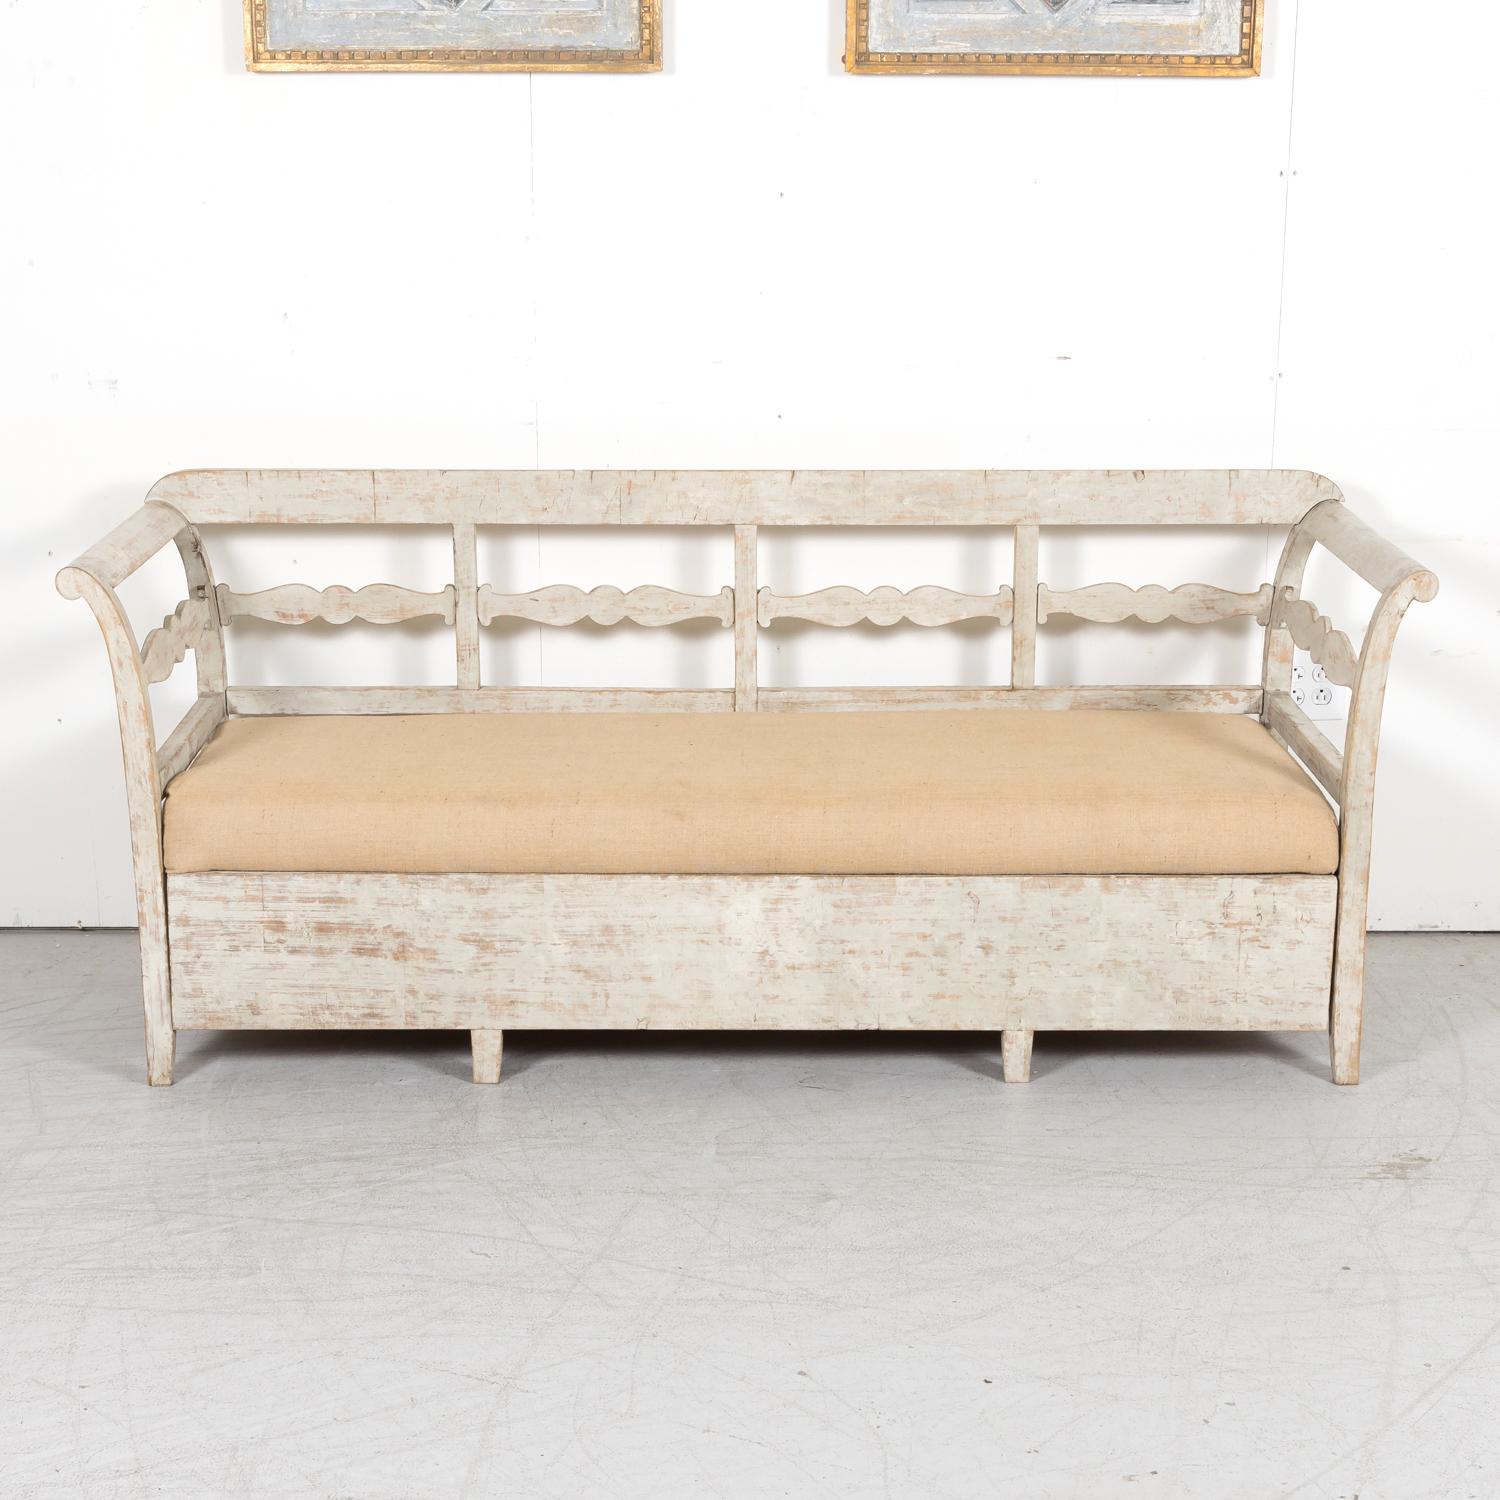 A 19th century painted Swedish hall or kitchen bench with drawer concealing a trundle bed, circa 1870s. Classic with graceful curved lines, this beautiful bench comes with a seat cushion and the drawer can be used for storage if needed.

For